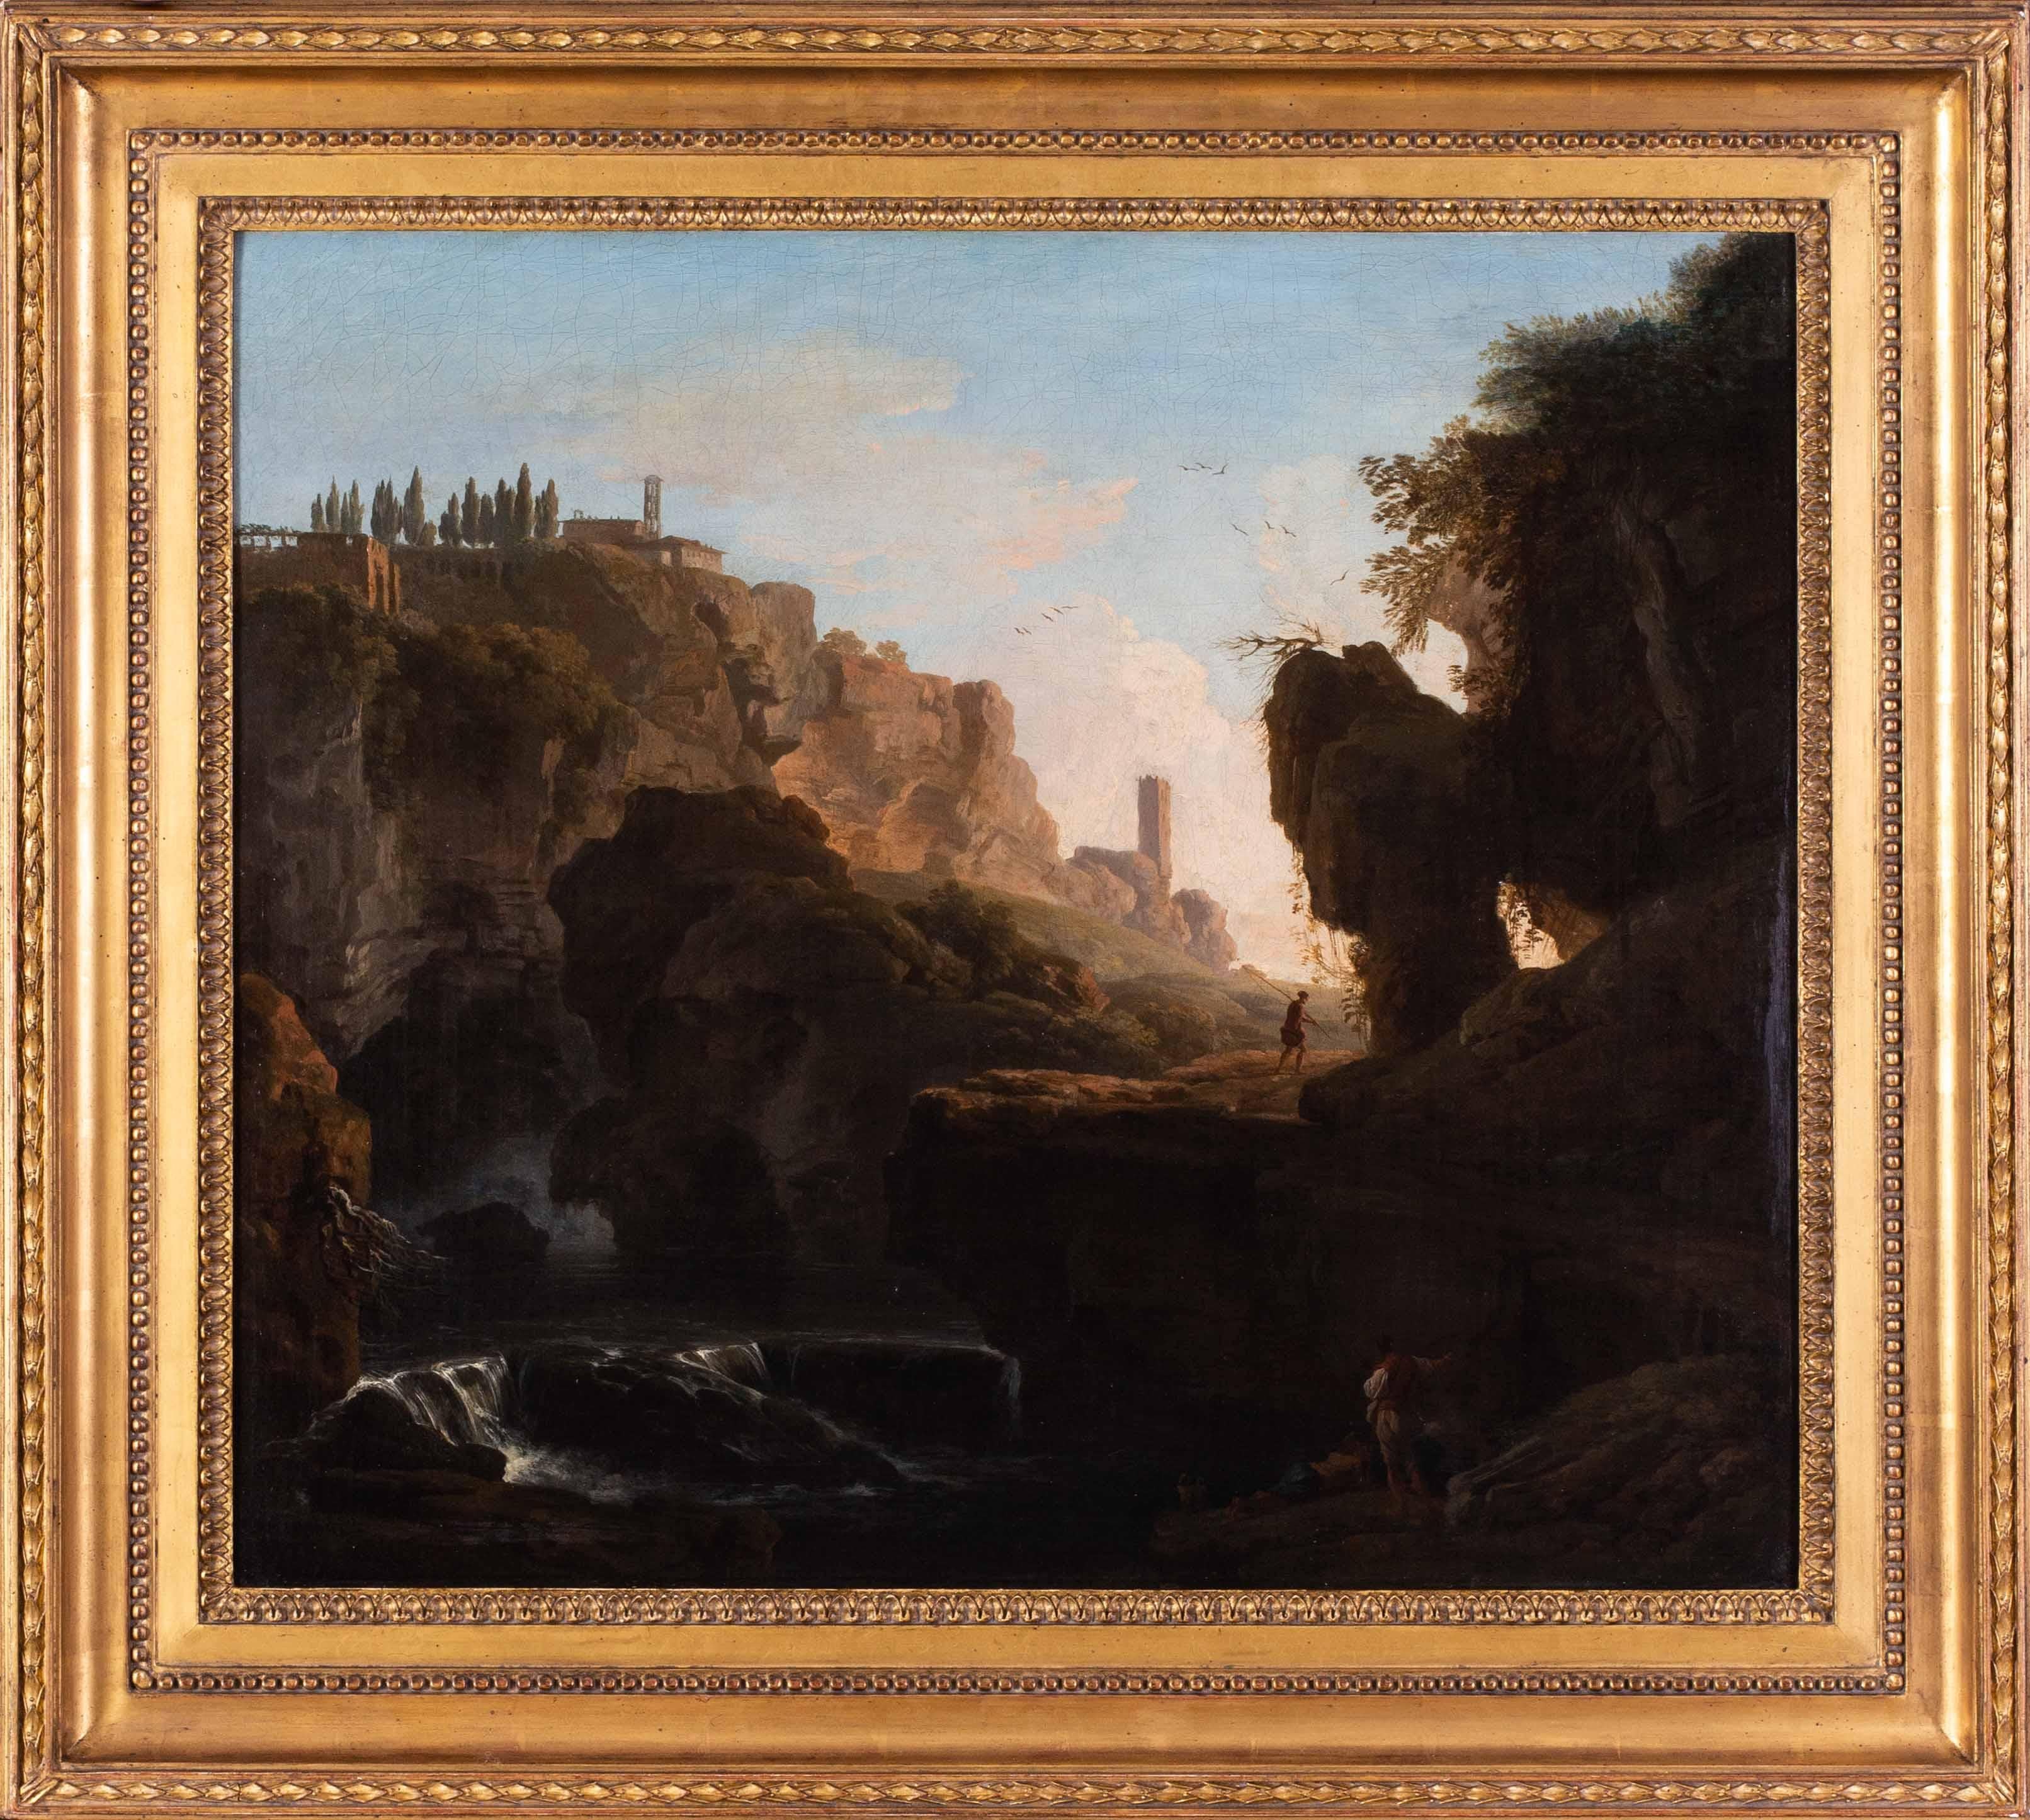 18th Century oil painting by Old master landscape painter Vernet